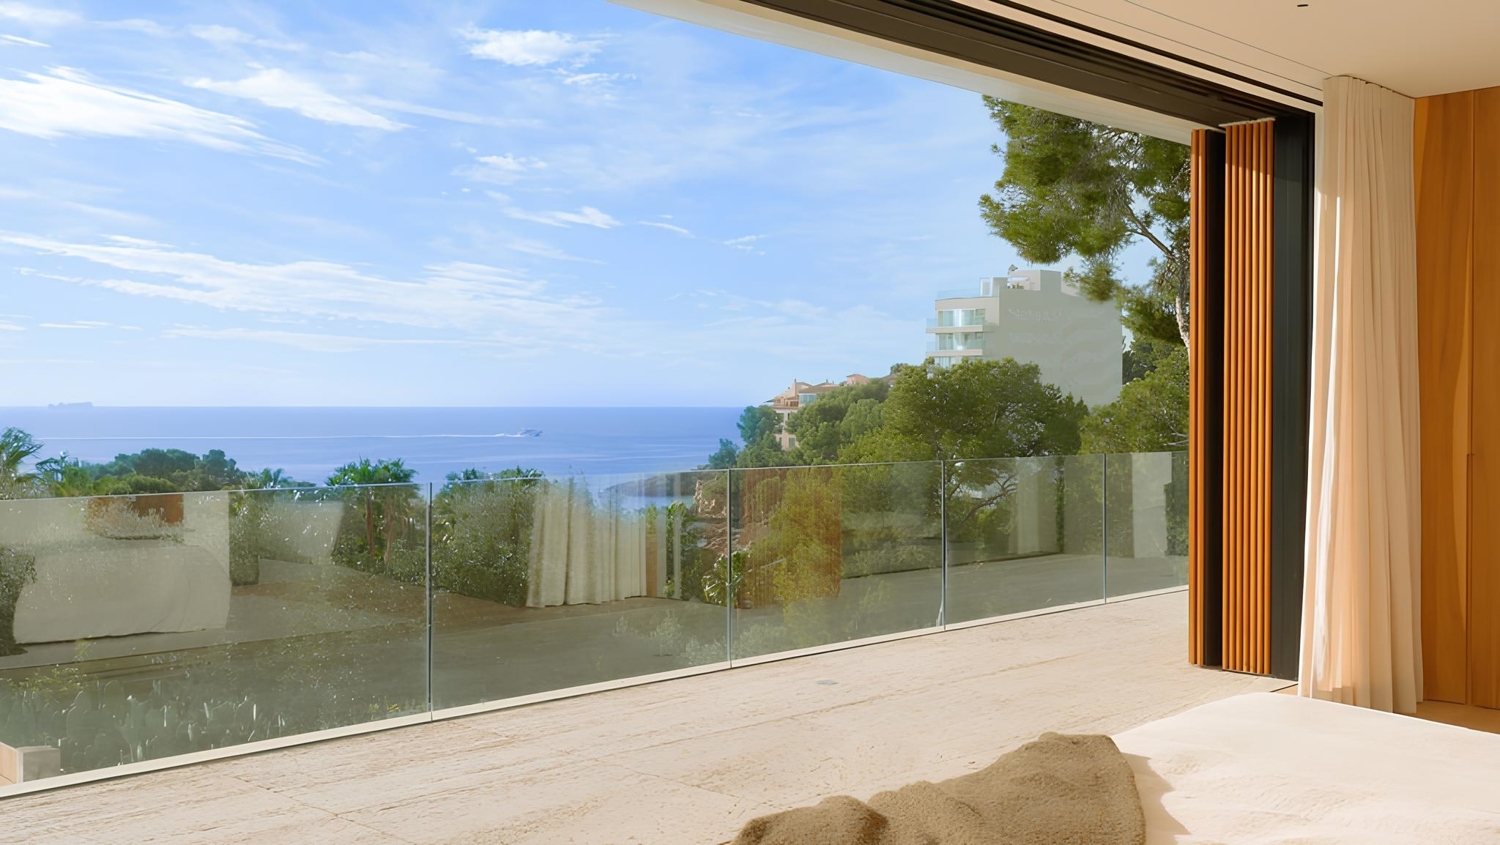 Captivating villa with sea view in Old Bendinat with 950 sqm of luxury living